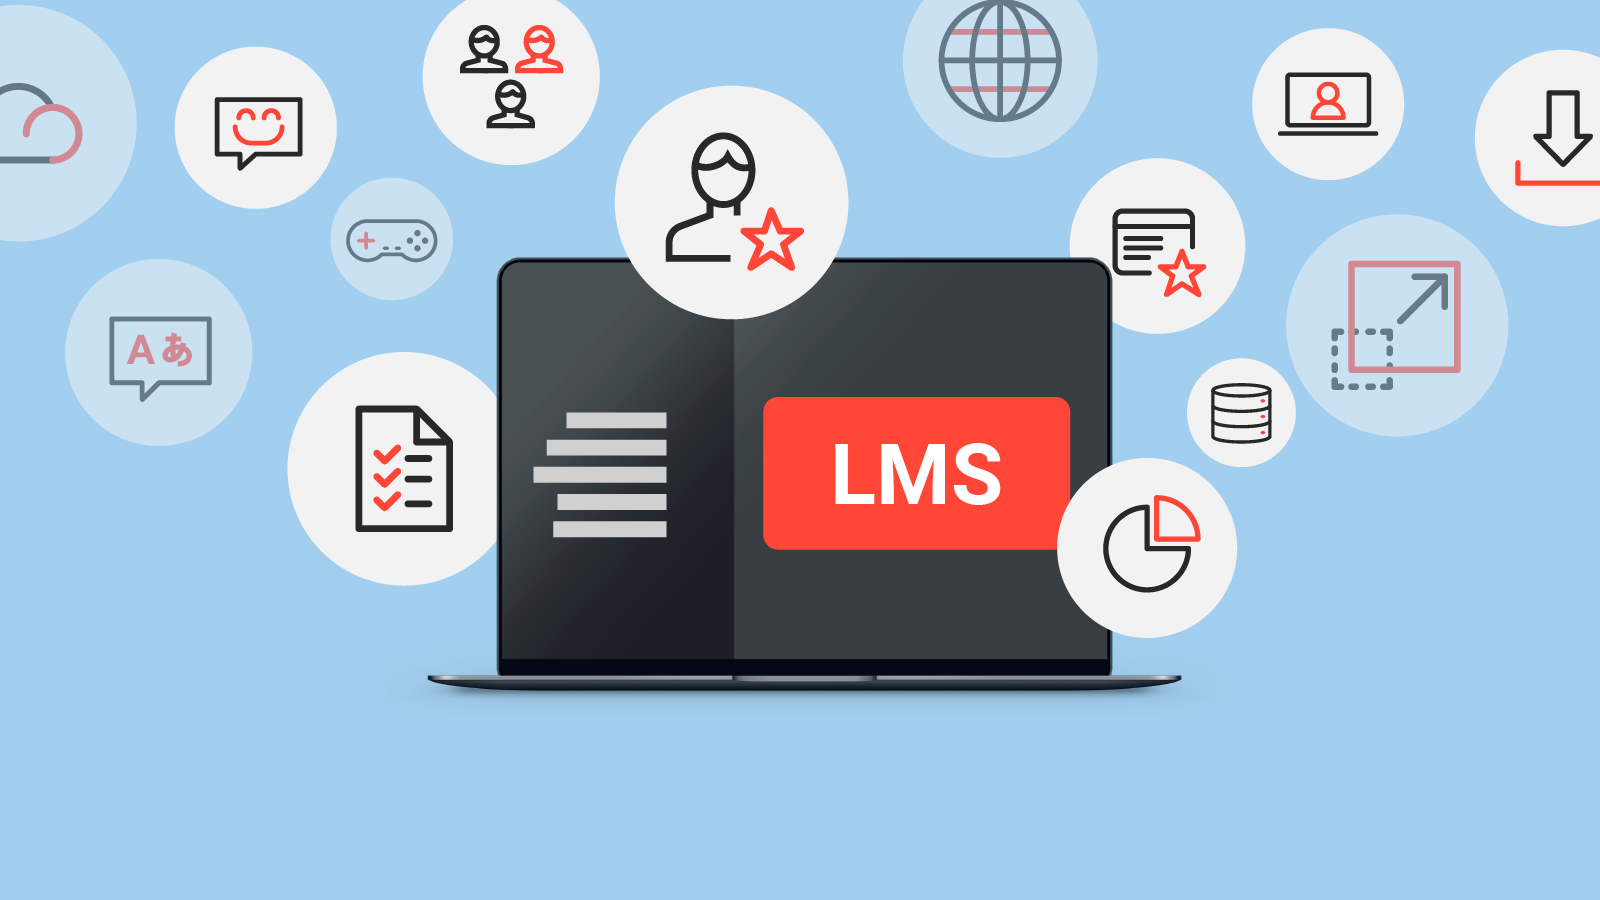 illustration of lms with capabilities